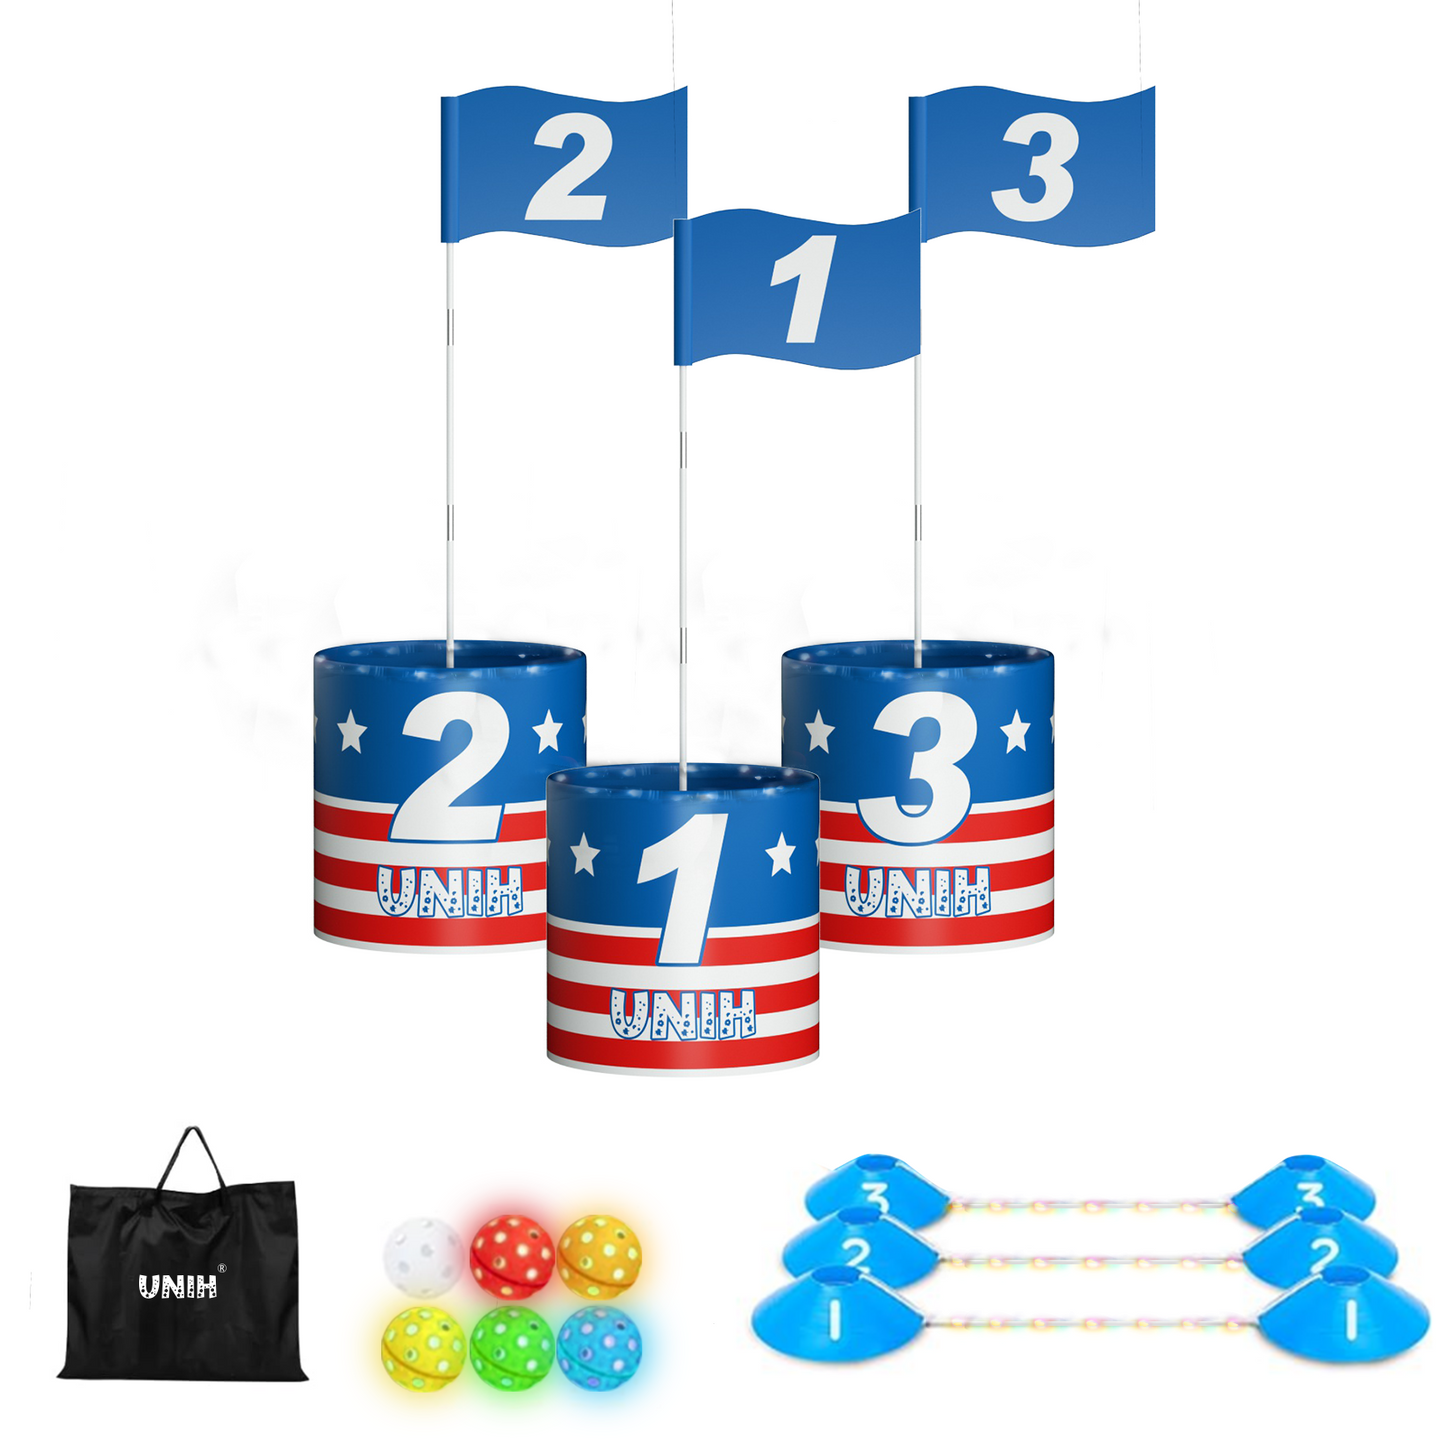 Golf Practice Game with Flag Chipping Game for Adults Family Kids Outdoor Indoor Backyard Golf Game PAR 3 with Lights